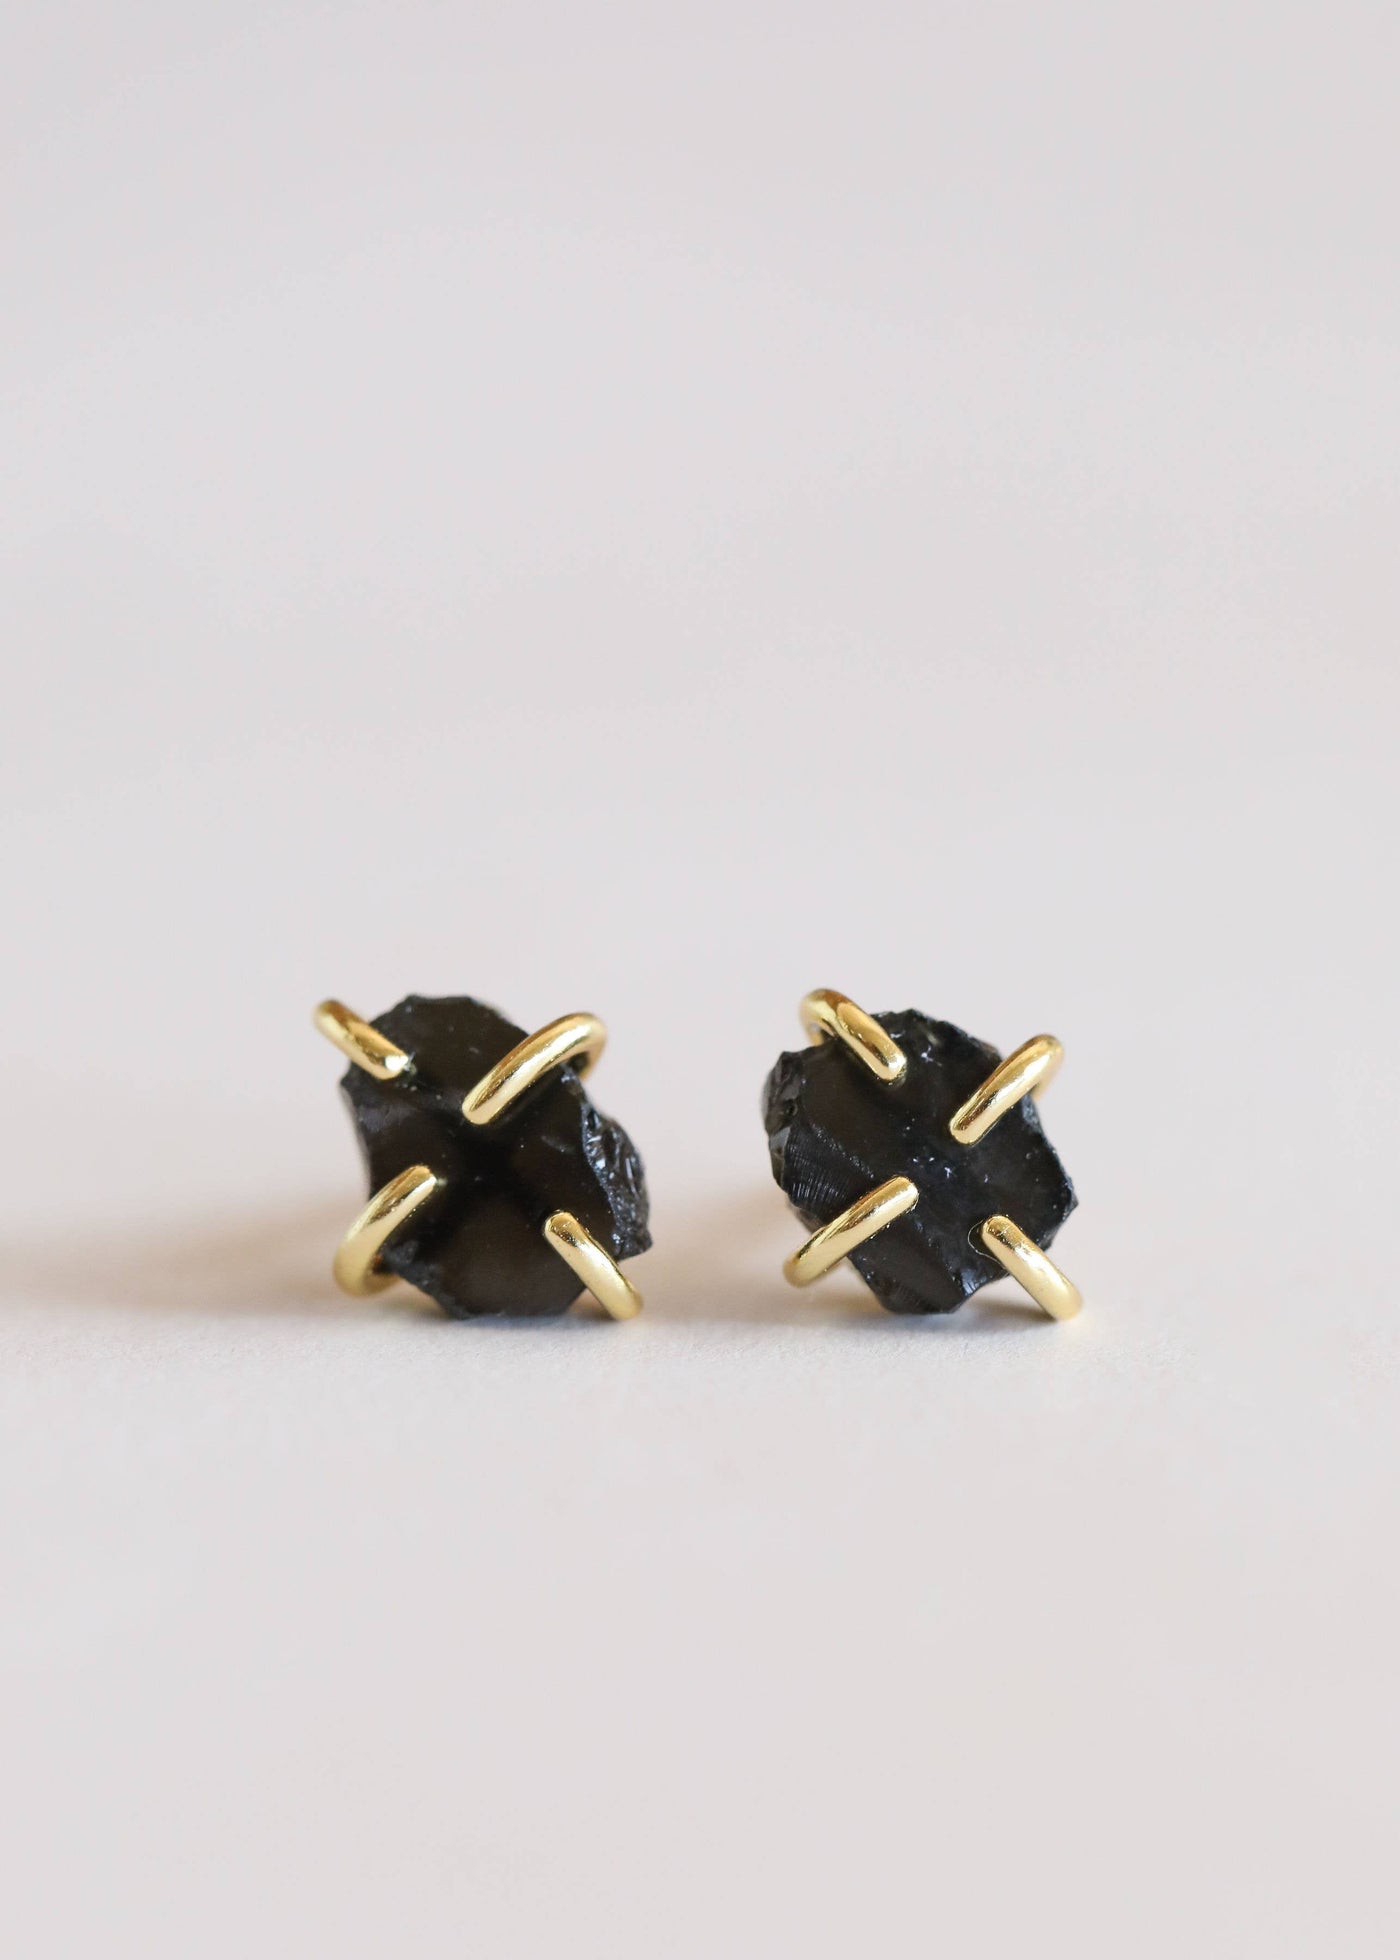 Obsidian Gemstone Prong Earrings - The Lake and Company